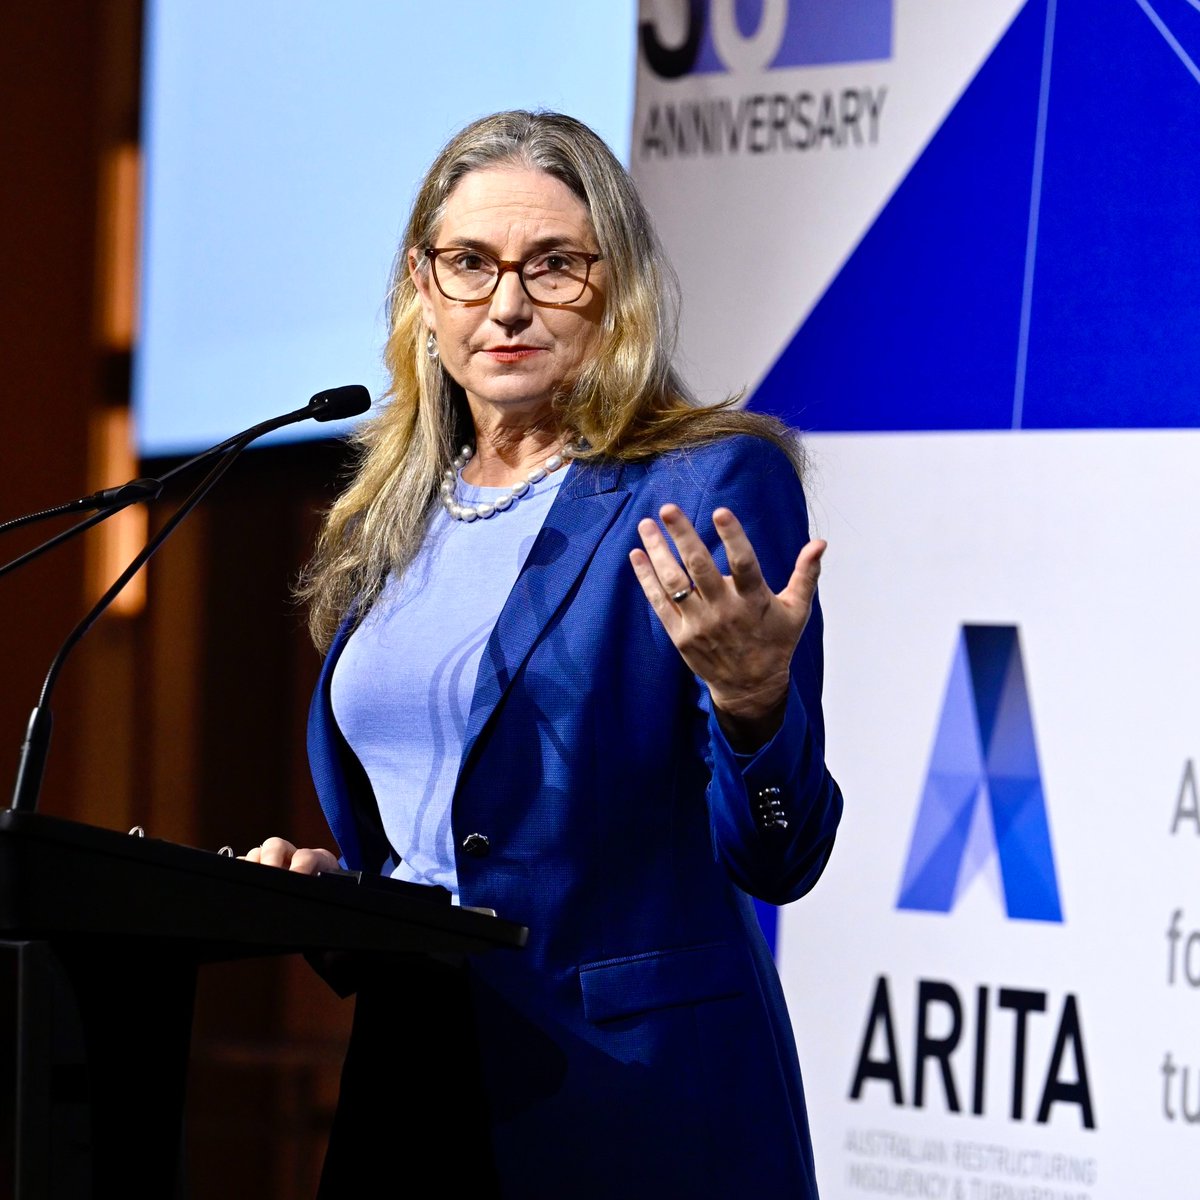 Speaking at the ARITA National Conference today, ASIC Commissioner Kate O’Rourke announced consultation on misconduct reporting guidance for external administrators bit.ly/4avP1q5